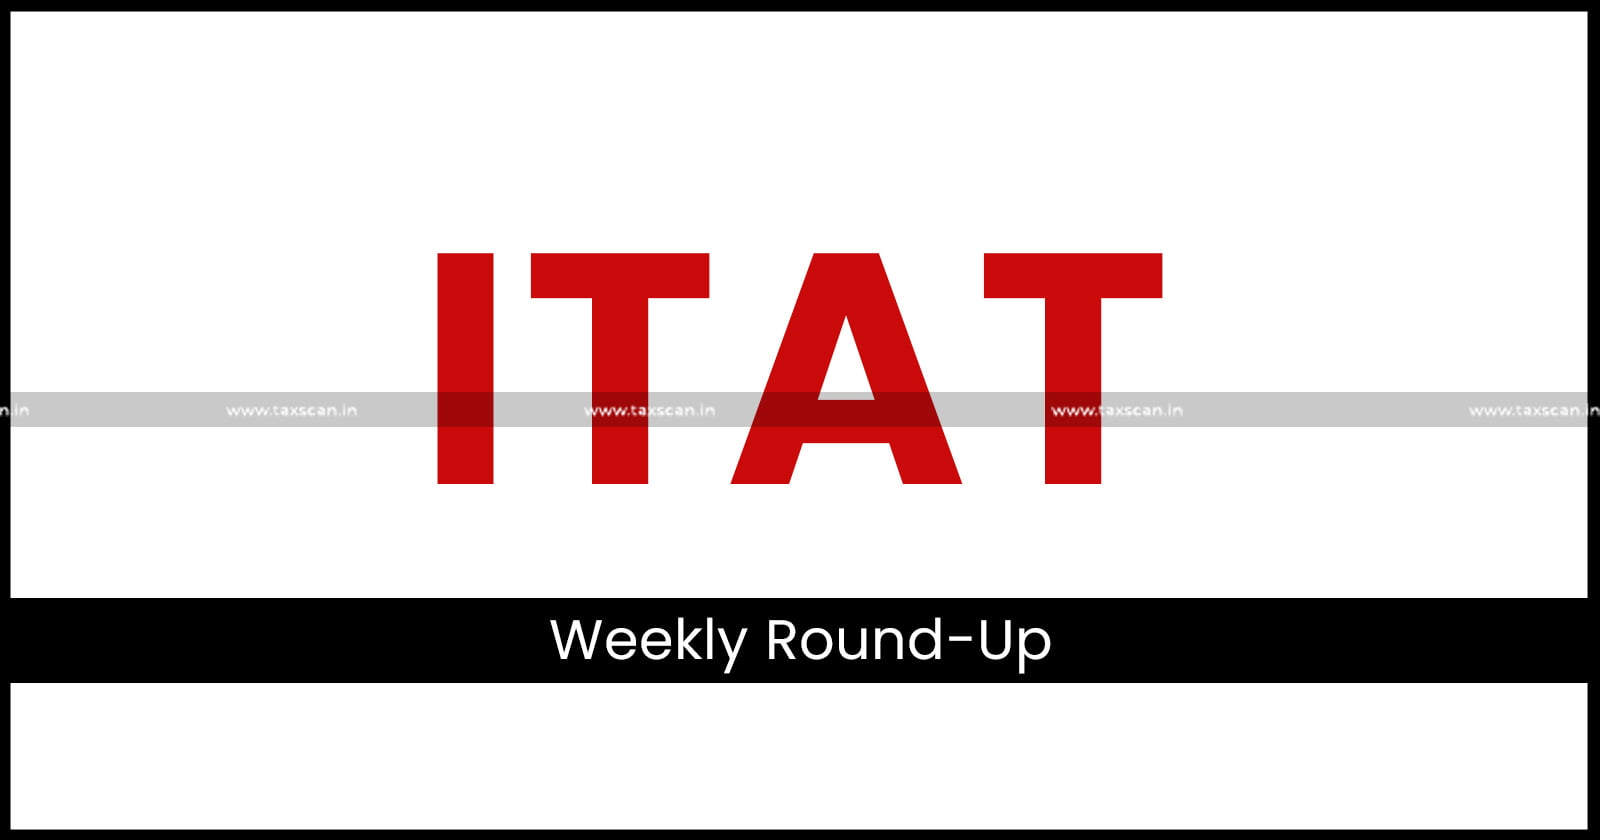 Itat Weekly Round Up - Itat Round Up - Income Tax Act - Income Tax - Weekly Round Up - Itat - Round - Up - TAXSCAN